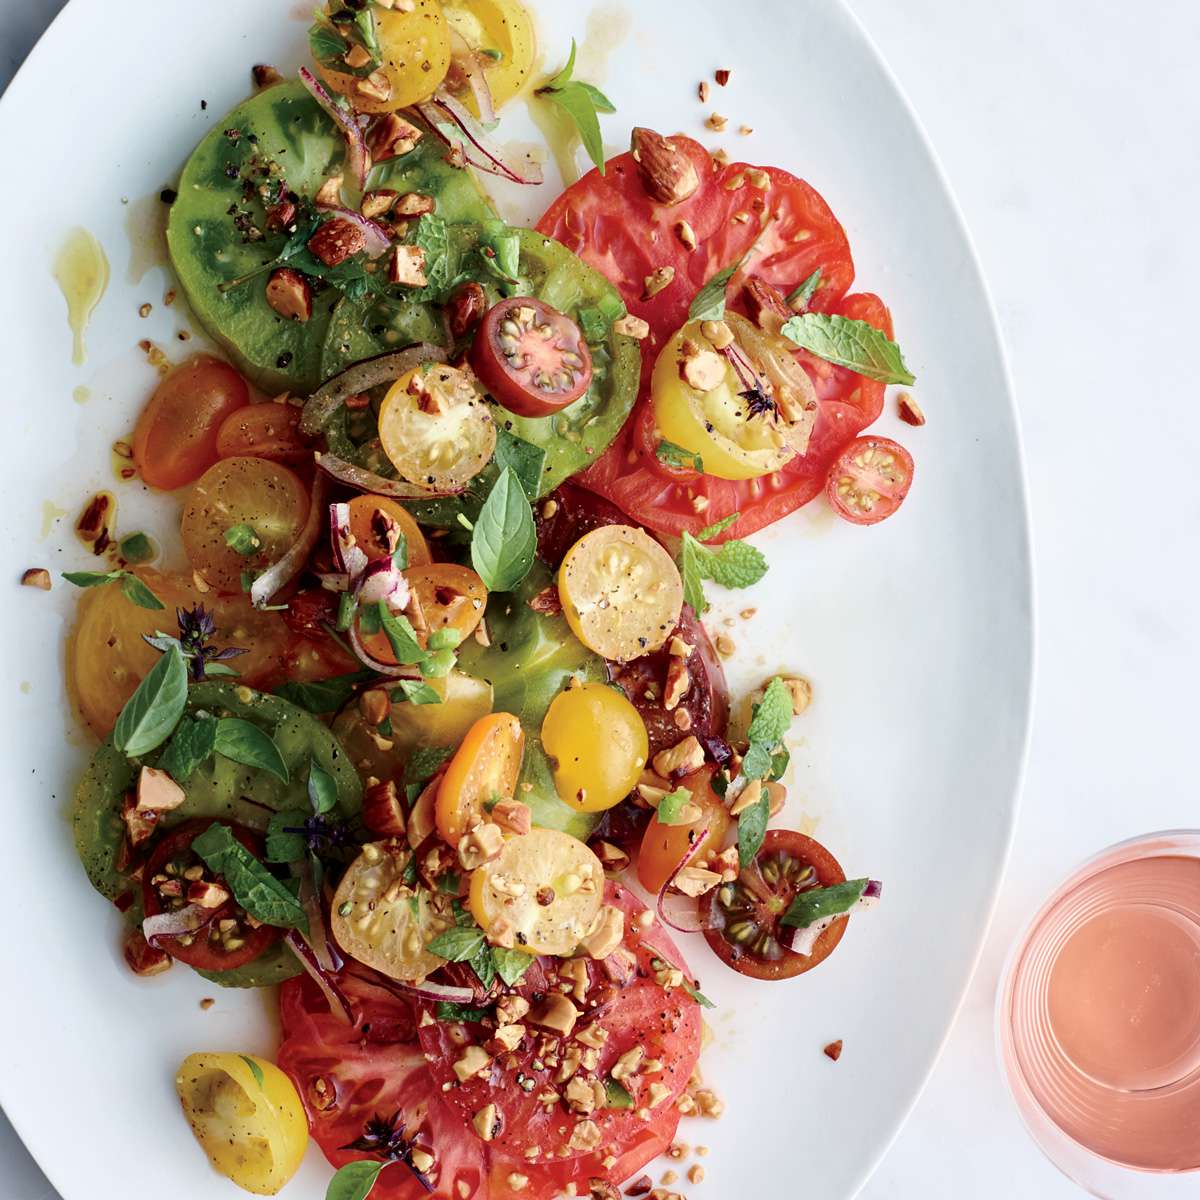 Tomatoes with Herbs and Almond Vinaigrette Recipe